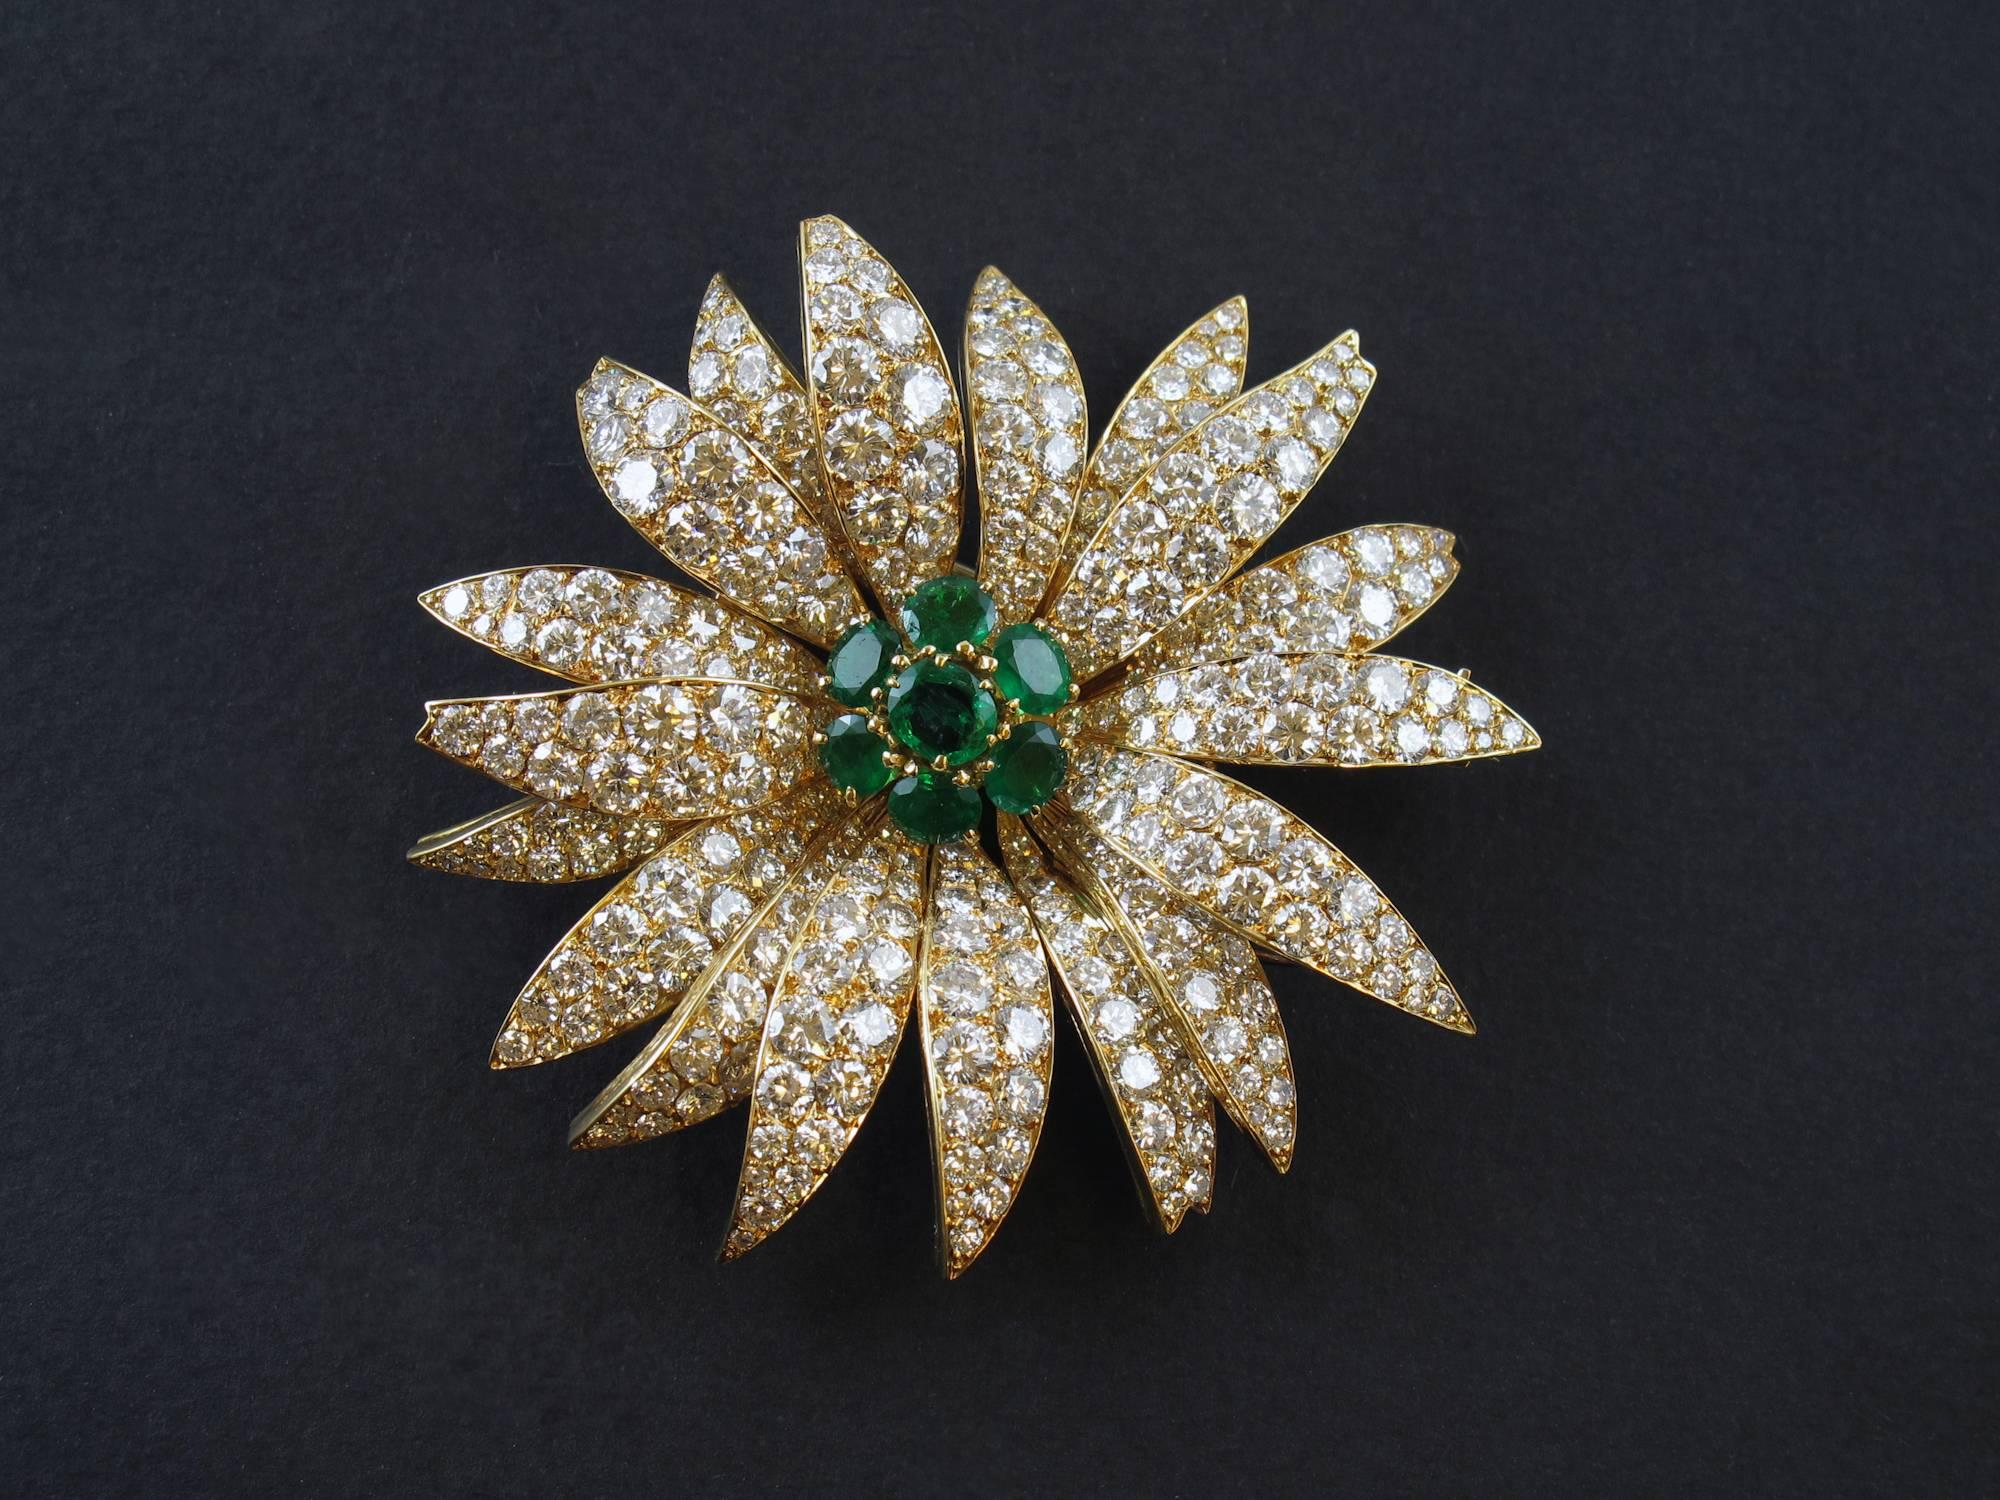 A yellow gold and diamond flower brooch centering 7 brilliant-cut emeralds. This model called Grand Marguerite has also been made for HSH Grace of Monaco in 1956. Paris, Van Cleef & Arpels
Signed, numbered and with VCA Hallmark